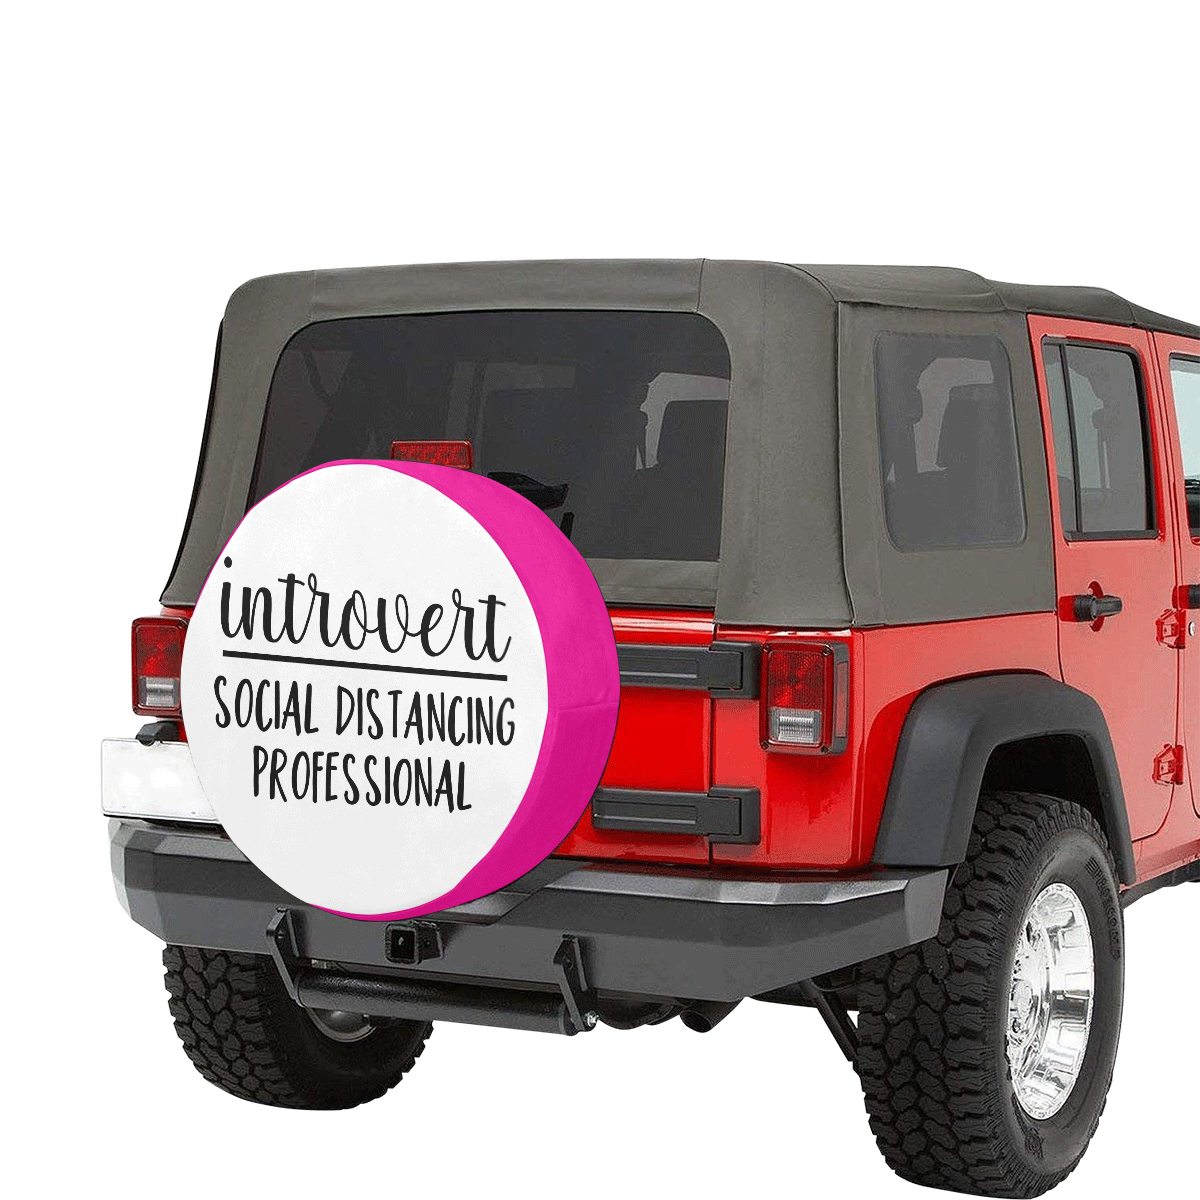 Introvert - Social Distancing Prof - hot pink 30 Inch Spare Tire Cover